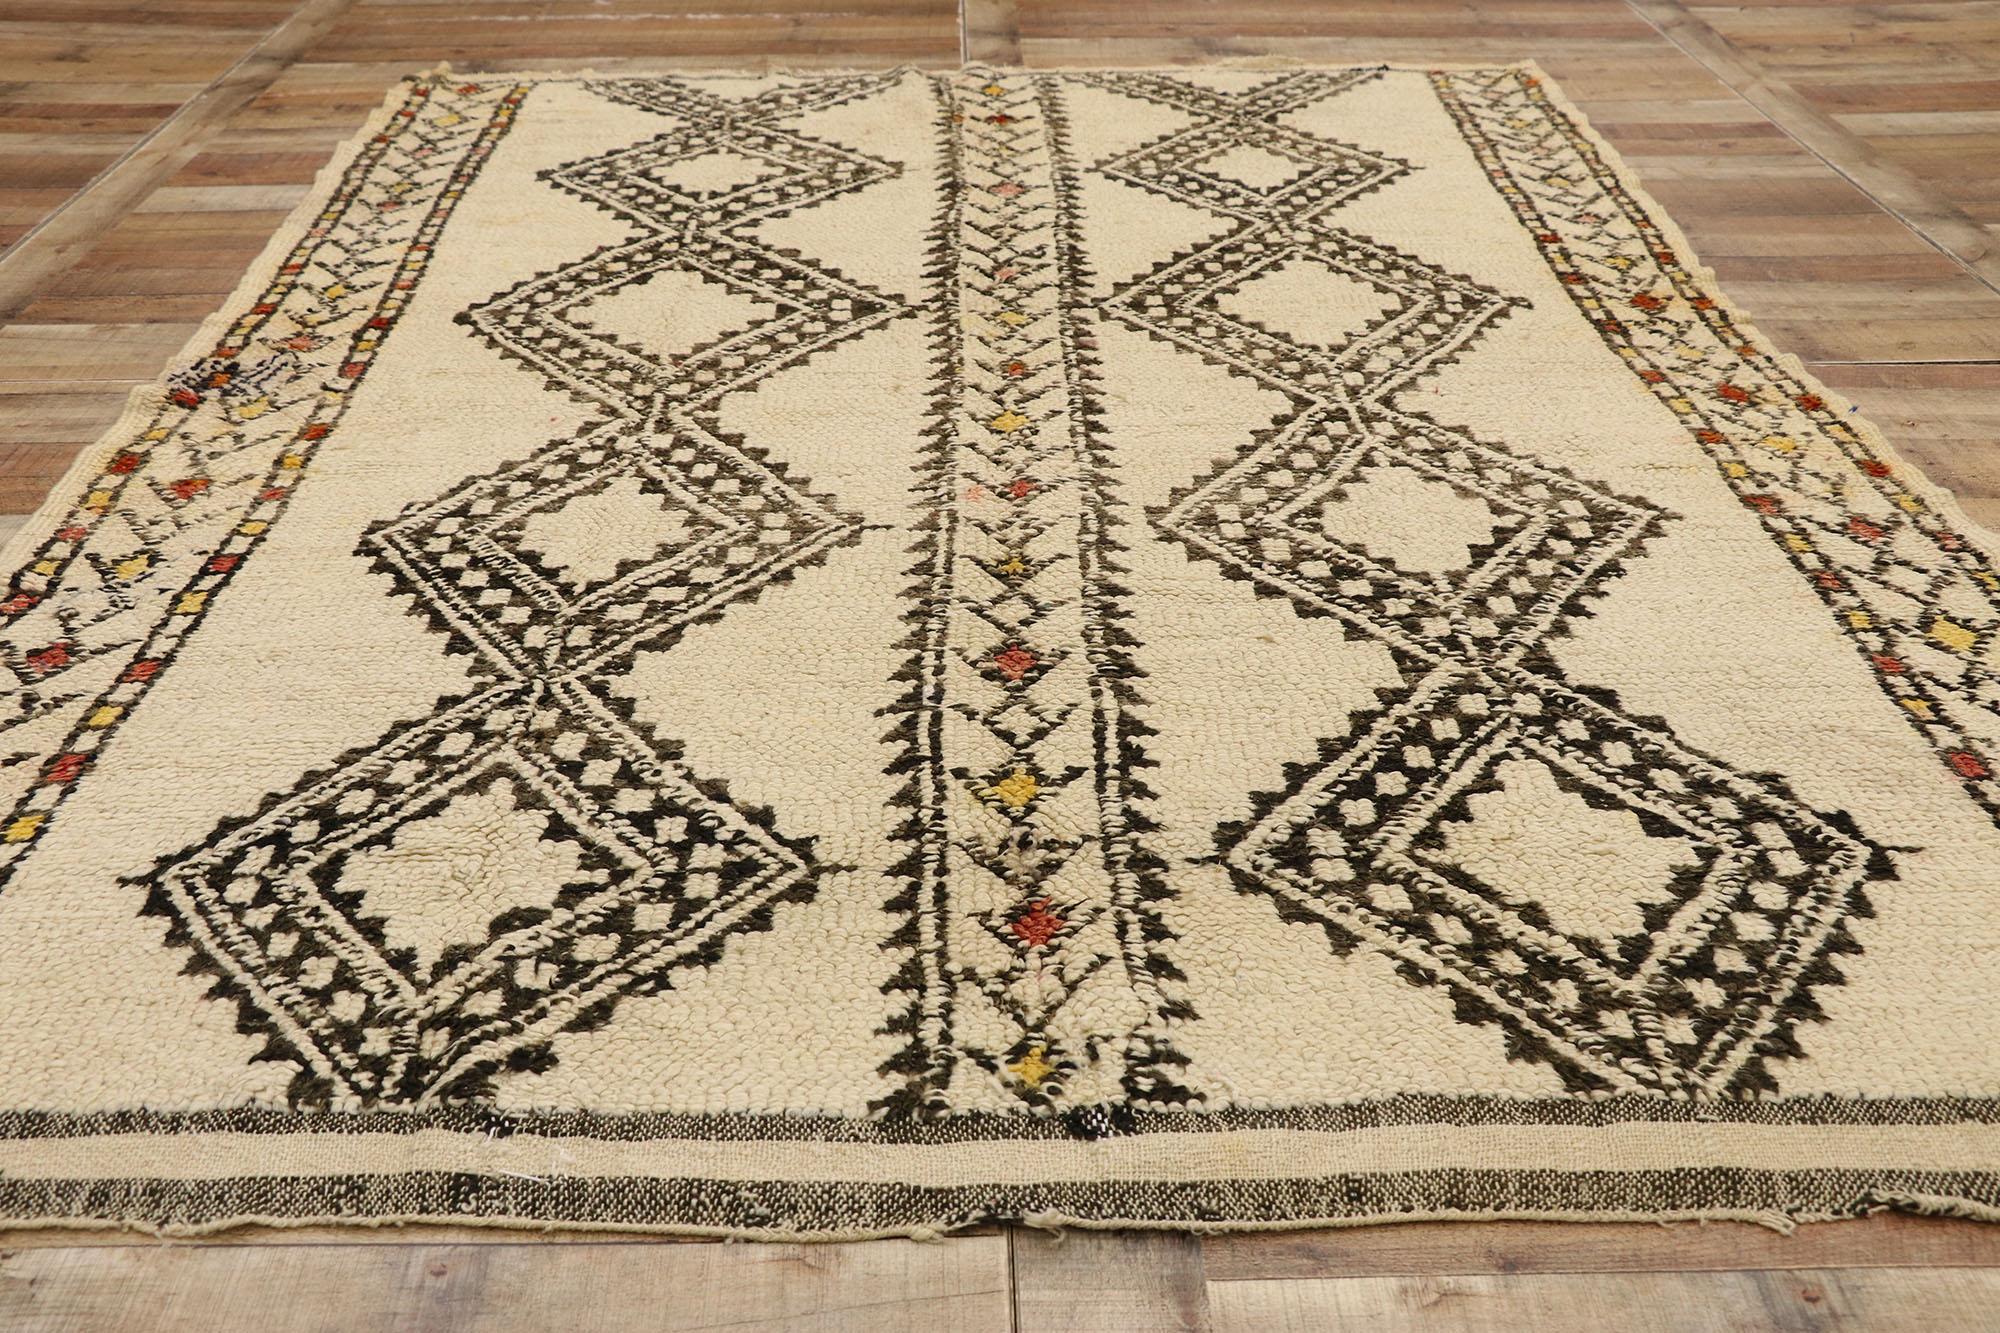 Vintage Beni Ourain Moroccan Rug with Mid-Century Modern Style and Hygge Vibes 1